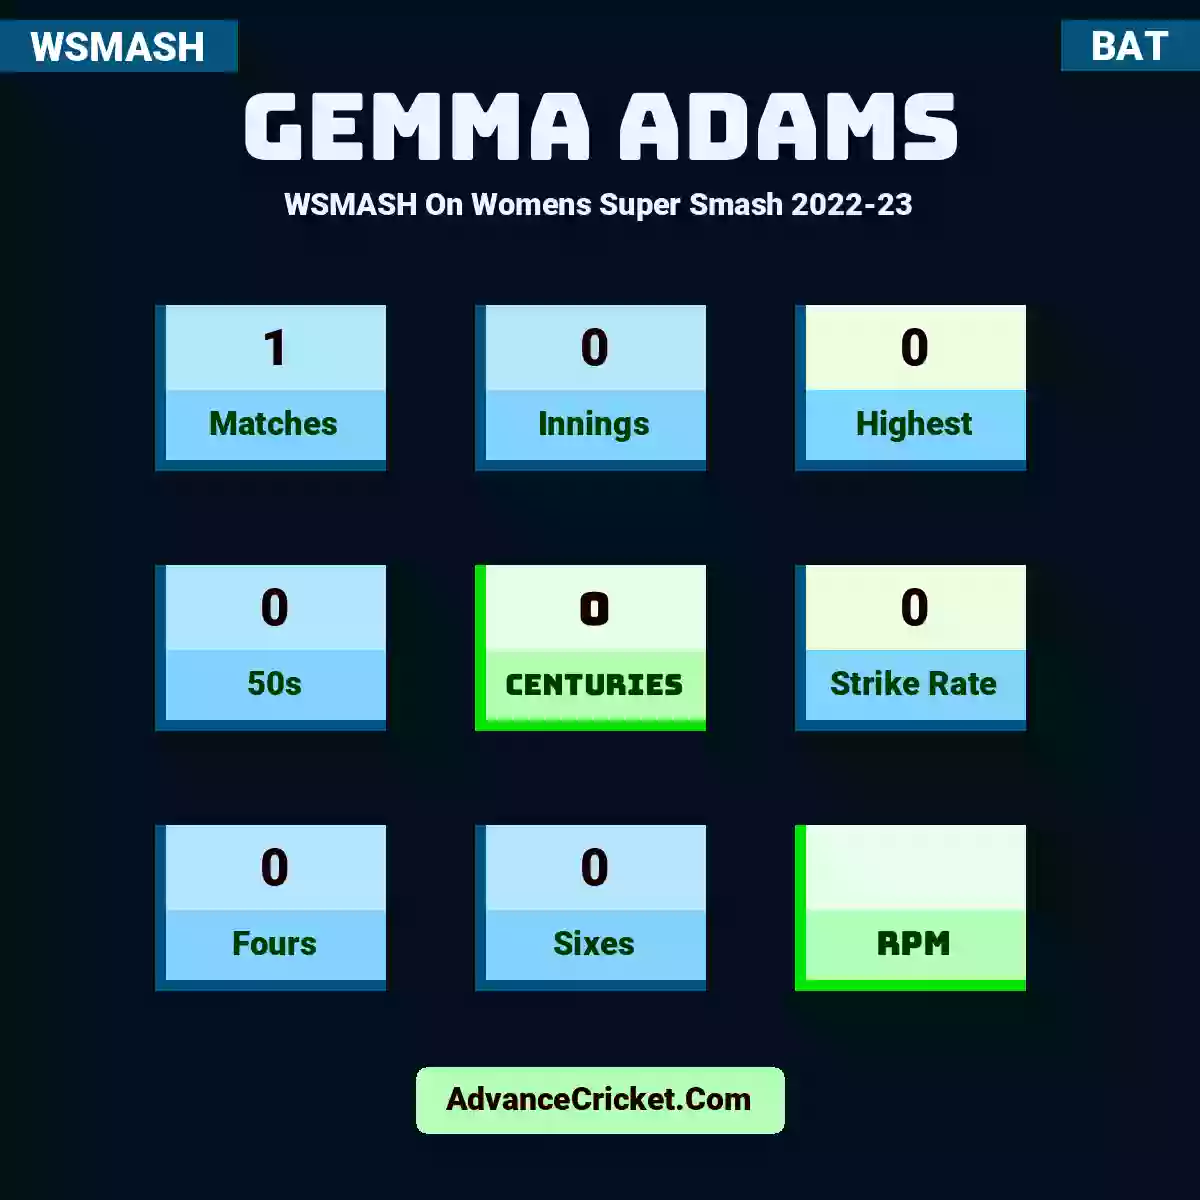 Gemma Adams WSMASH  On Womens Super Smash 2022-23, Gemma Adams played 1 matches, scored 0 runs as highest, 0 half-centuries, and 0 centuries, with a strike rate of 0. G.Adams hit 0 fours and 0 sixes.